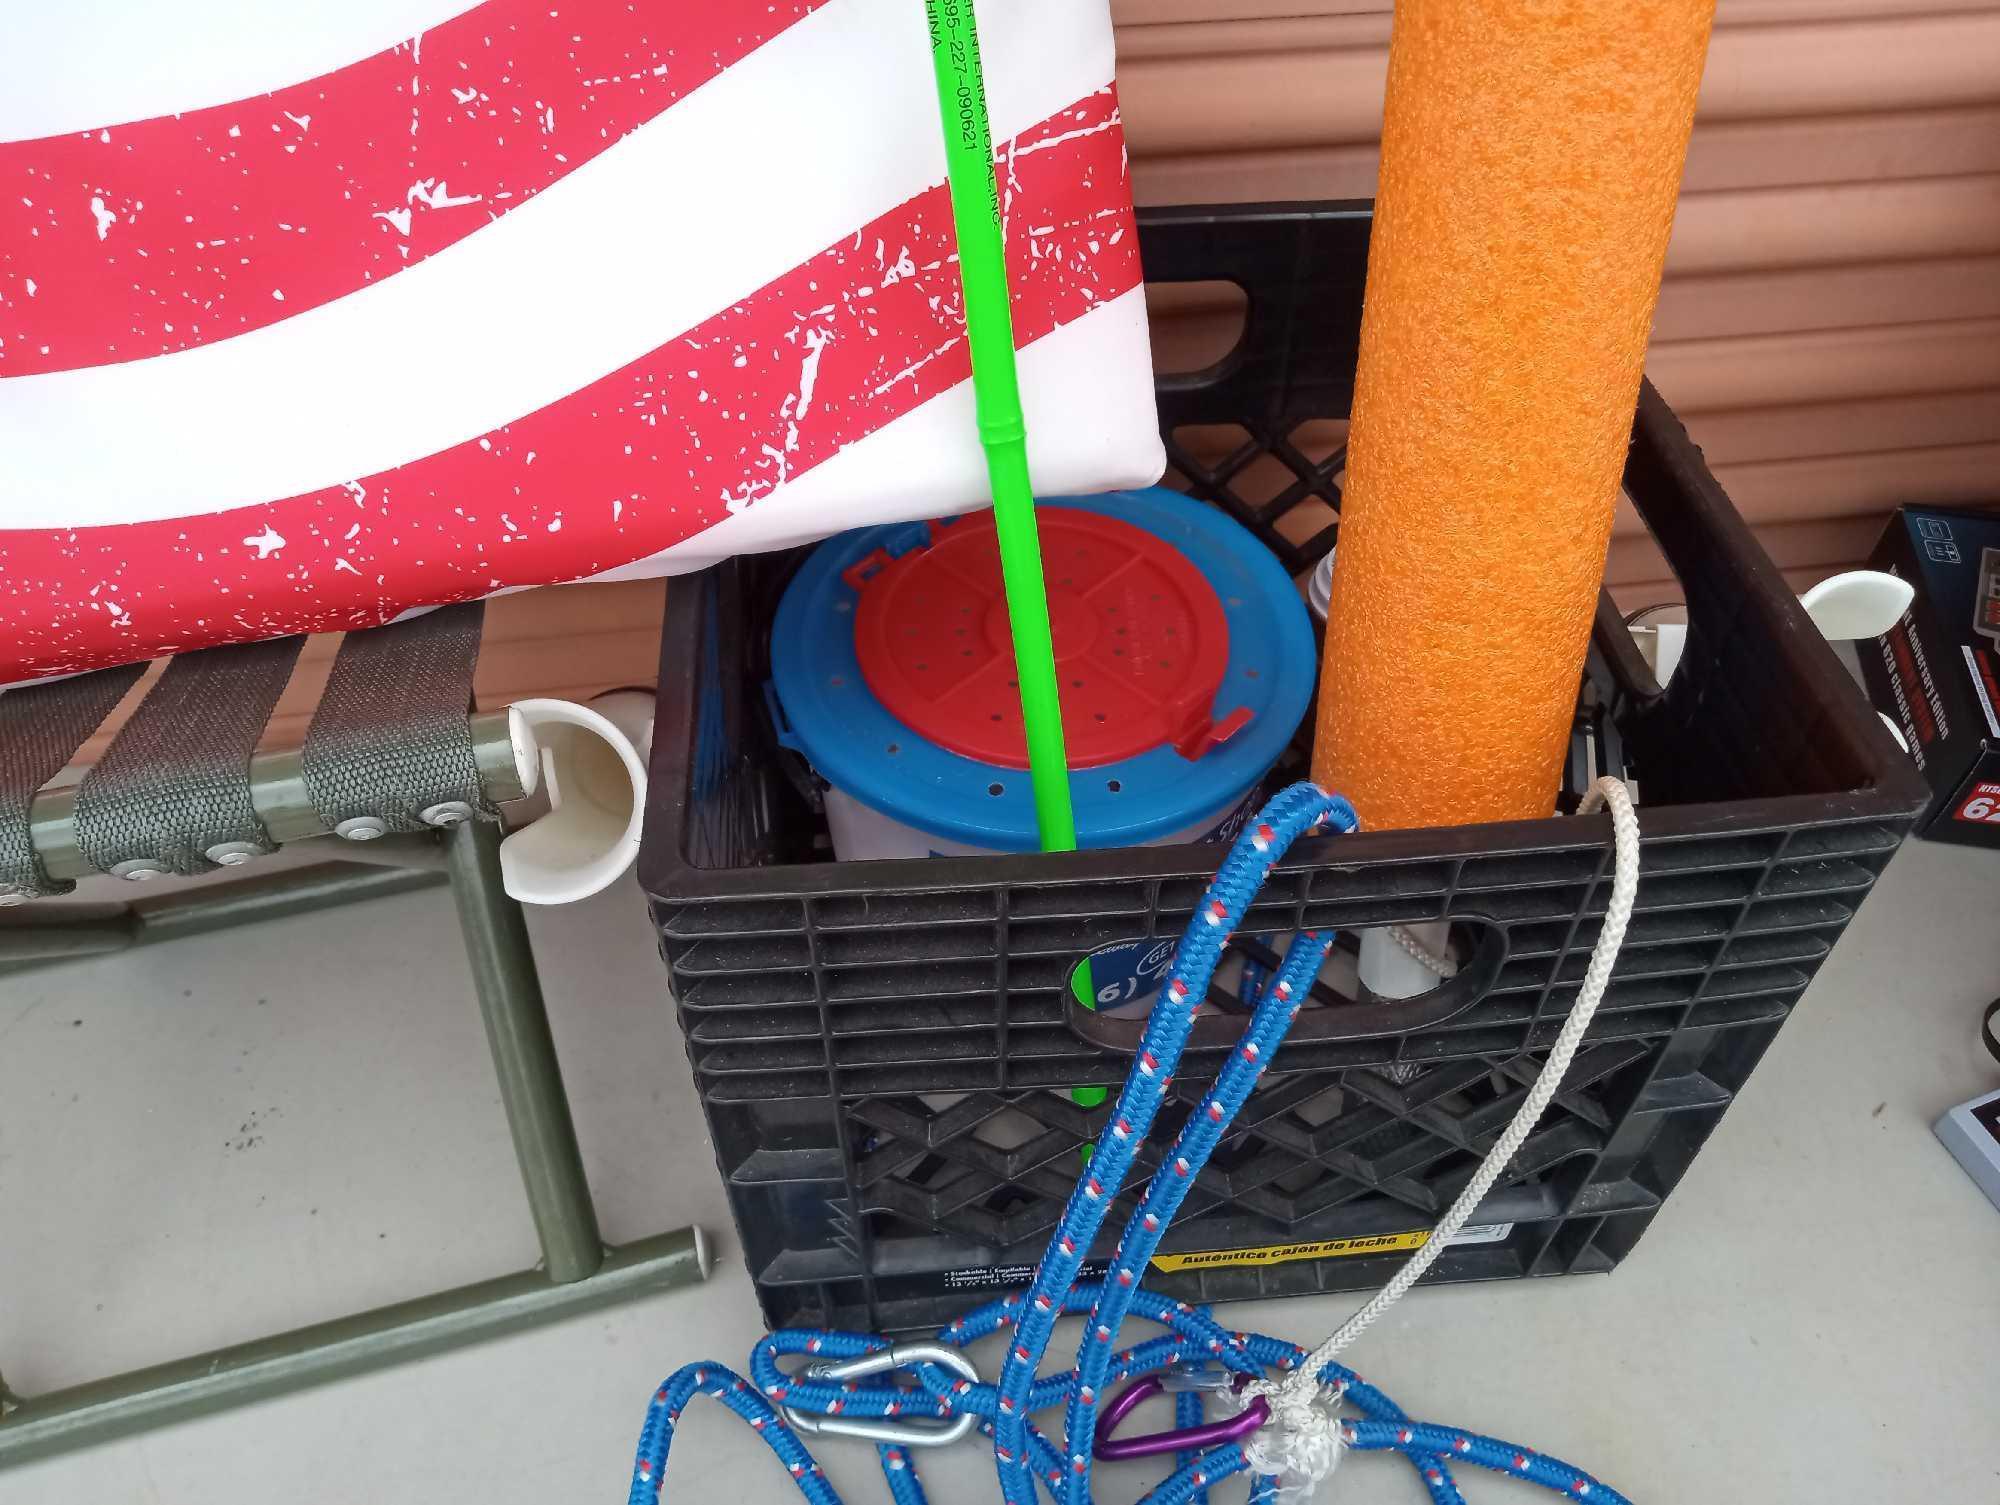 FISHING IN WATER GEAR INCLUDING NET, BAIT BUCKET, FOLDABLE STAND AND PAD WITH FISHING POLE HOLDERS